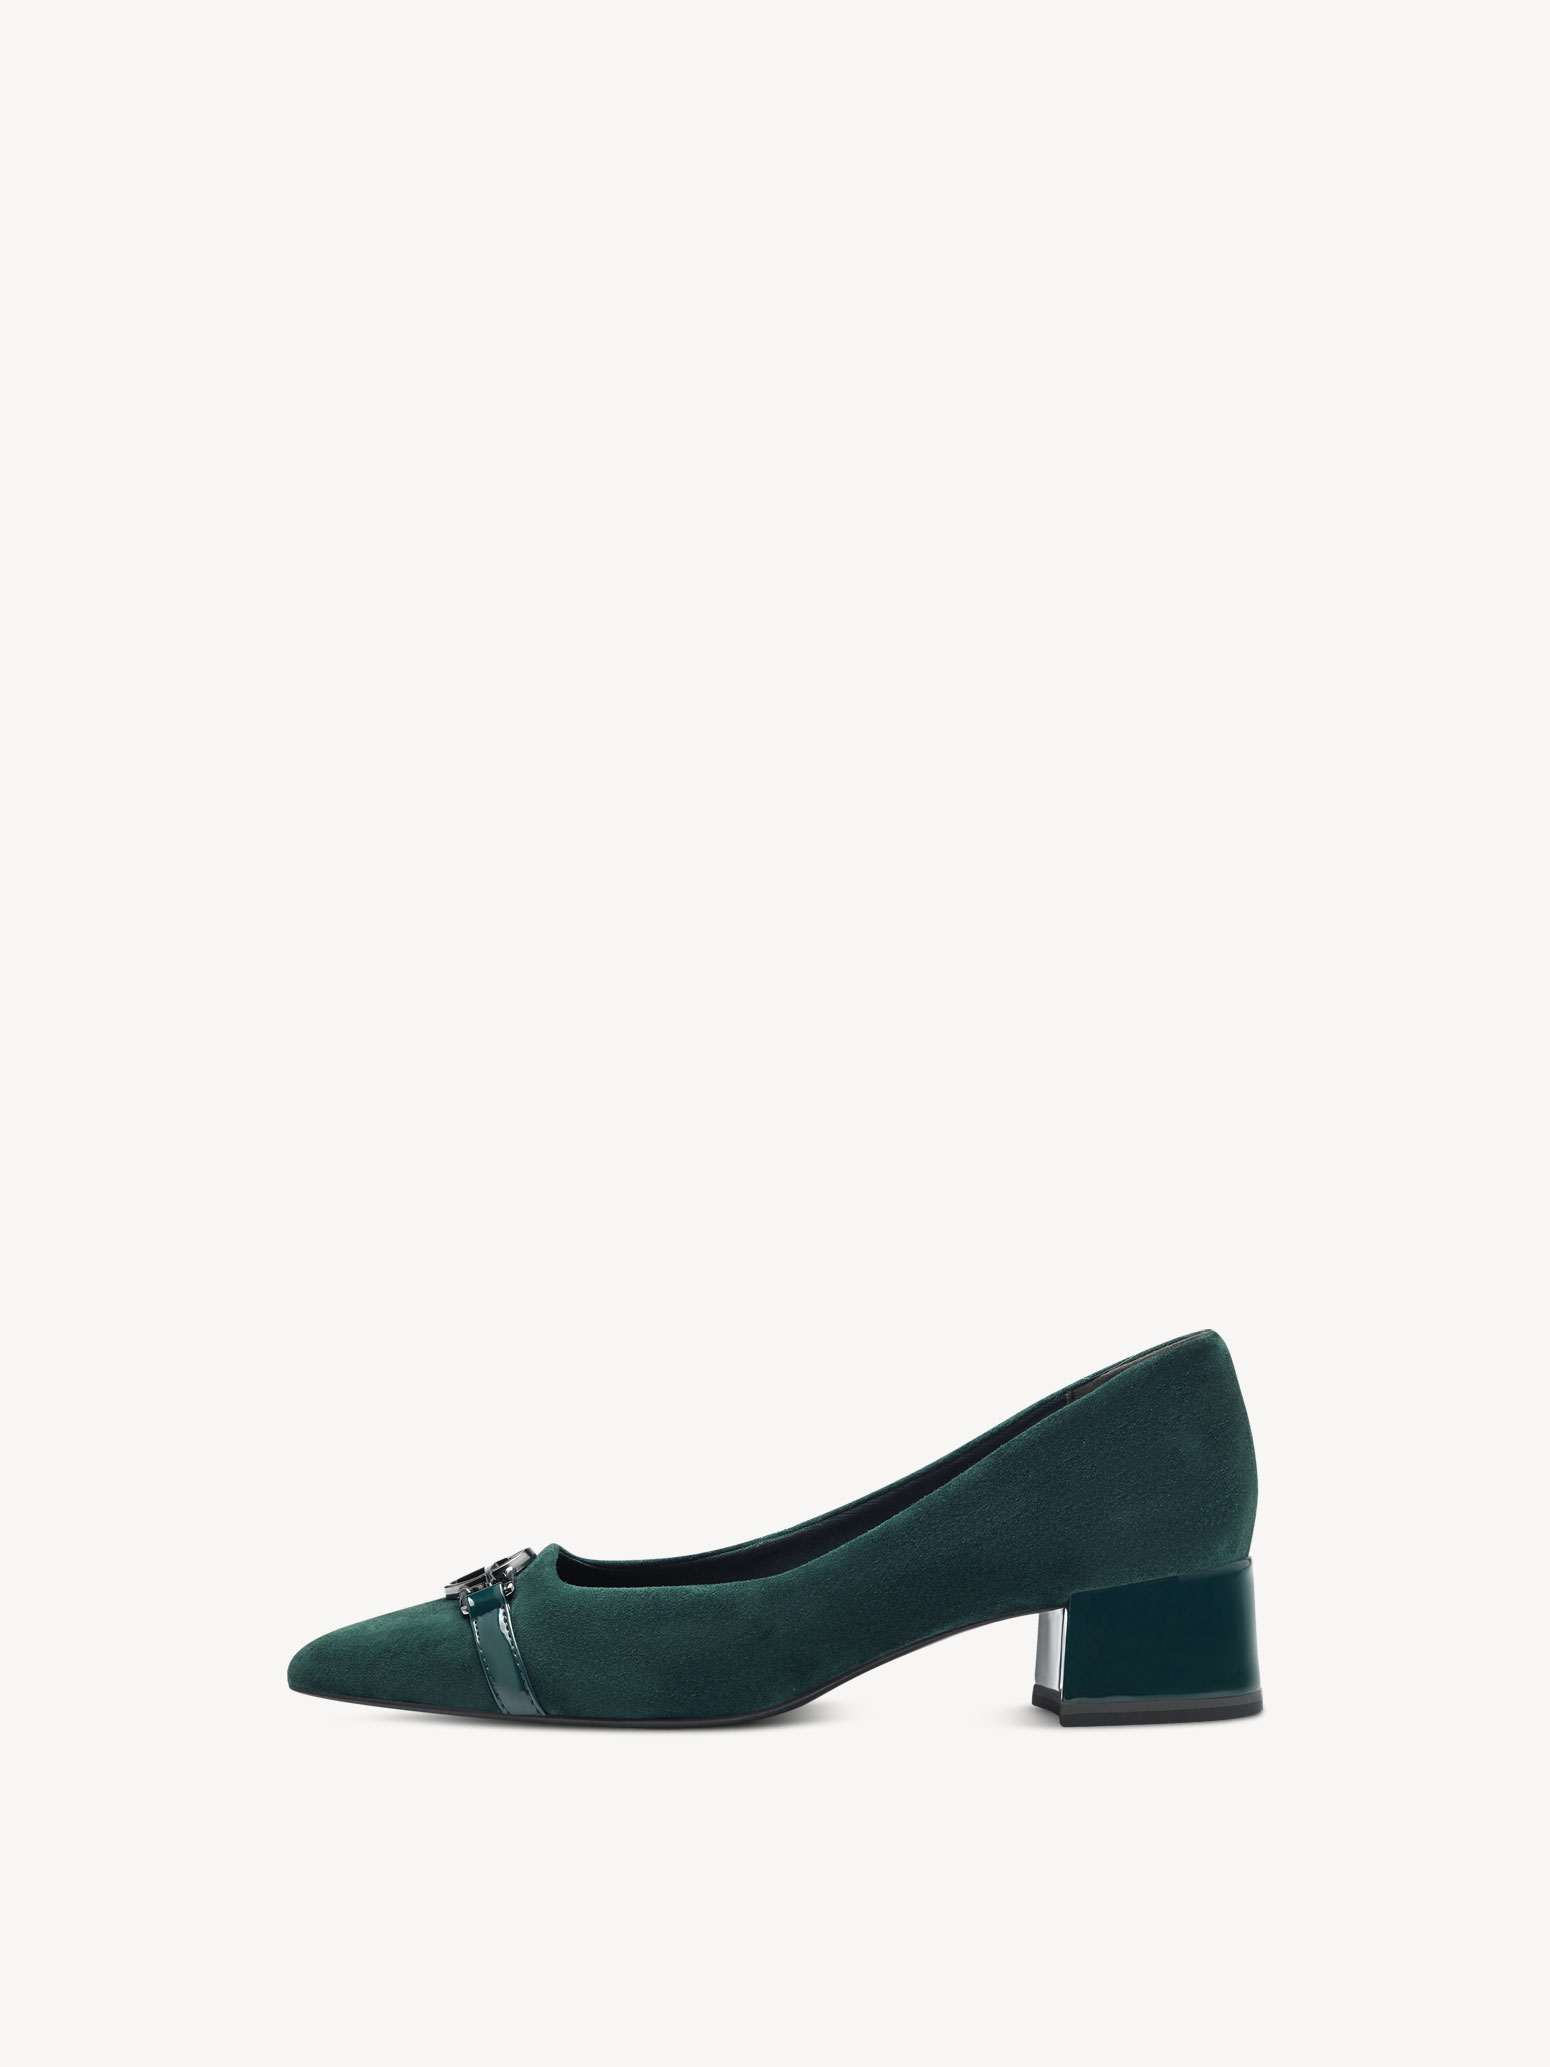 Leather Pumps - green